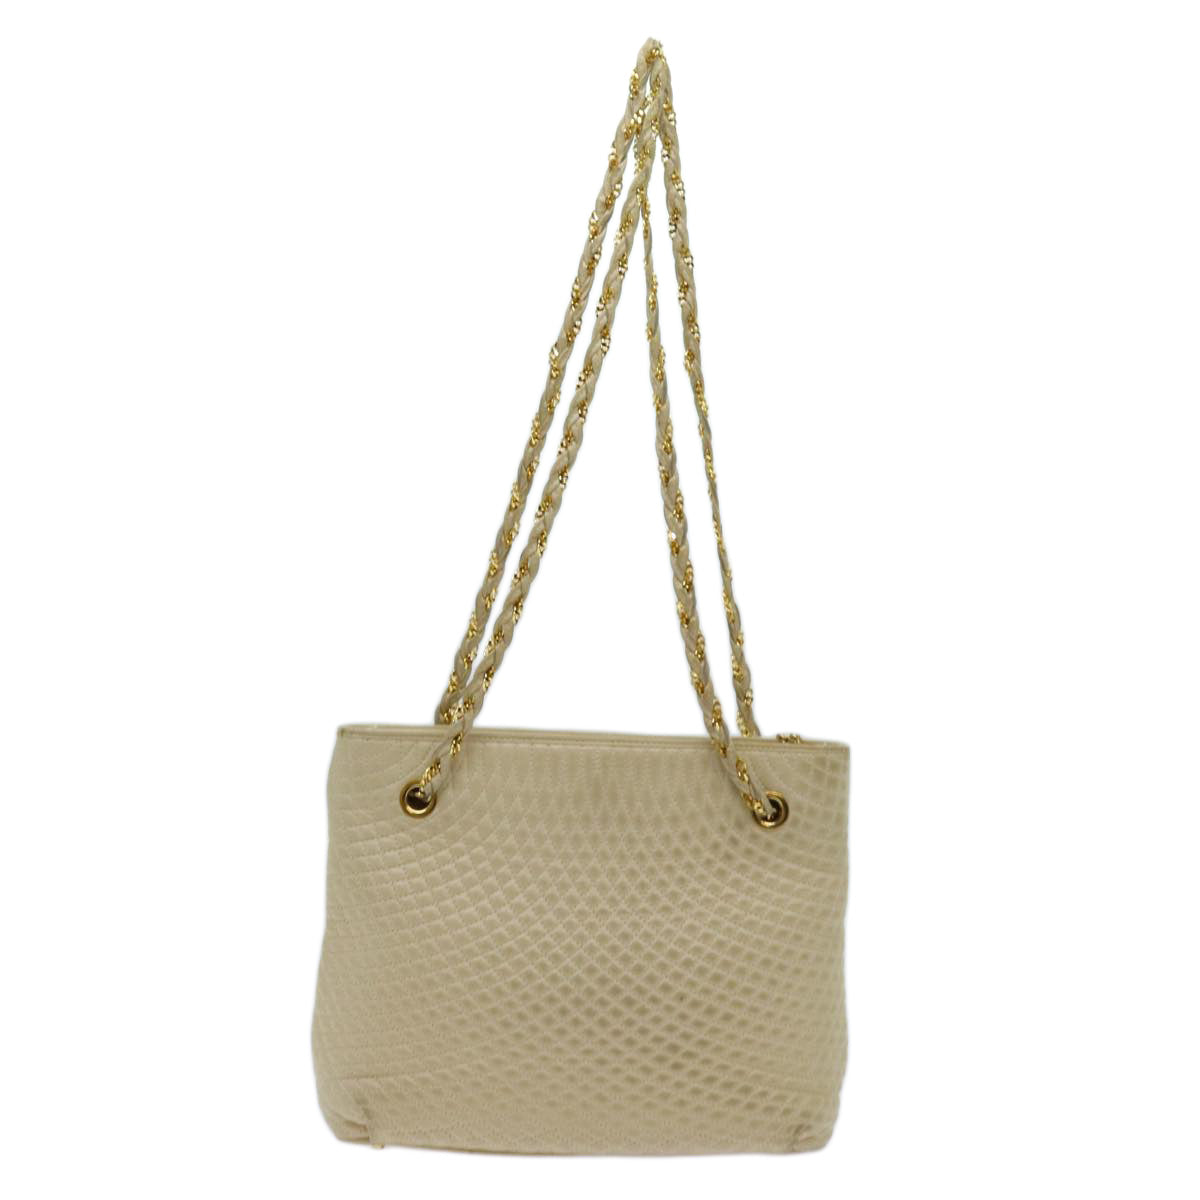 BALLY Quilted Chain Shoulder Bag Leather Beige Auth ac2905